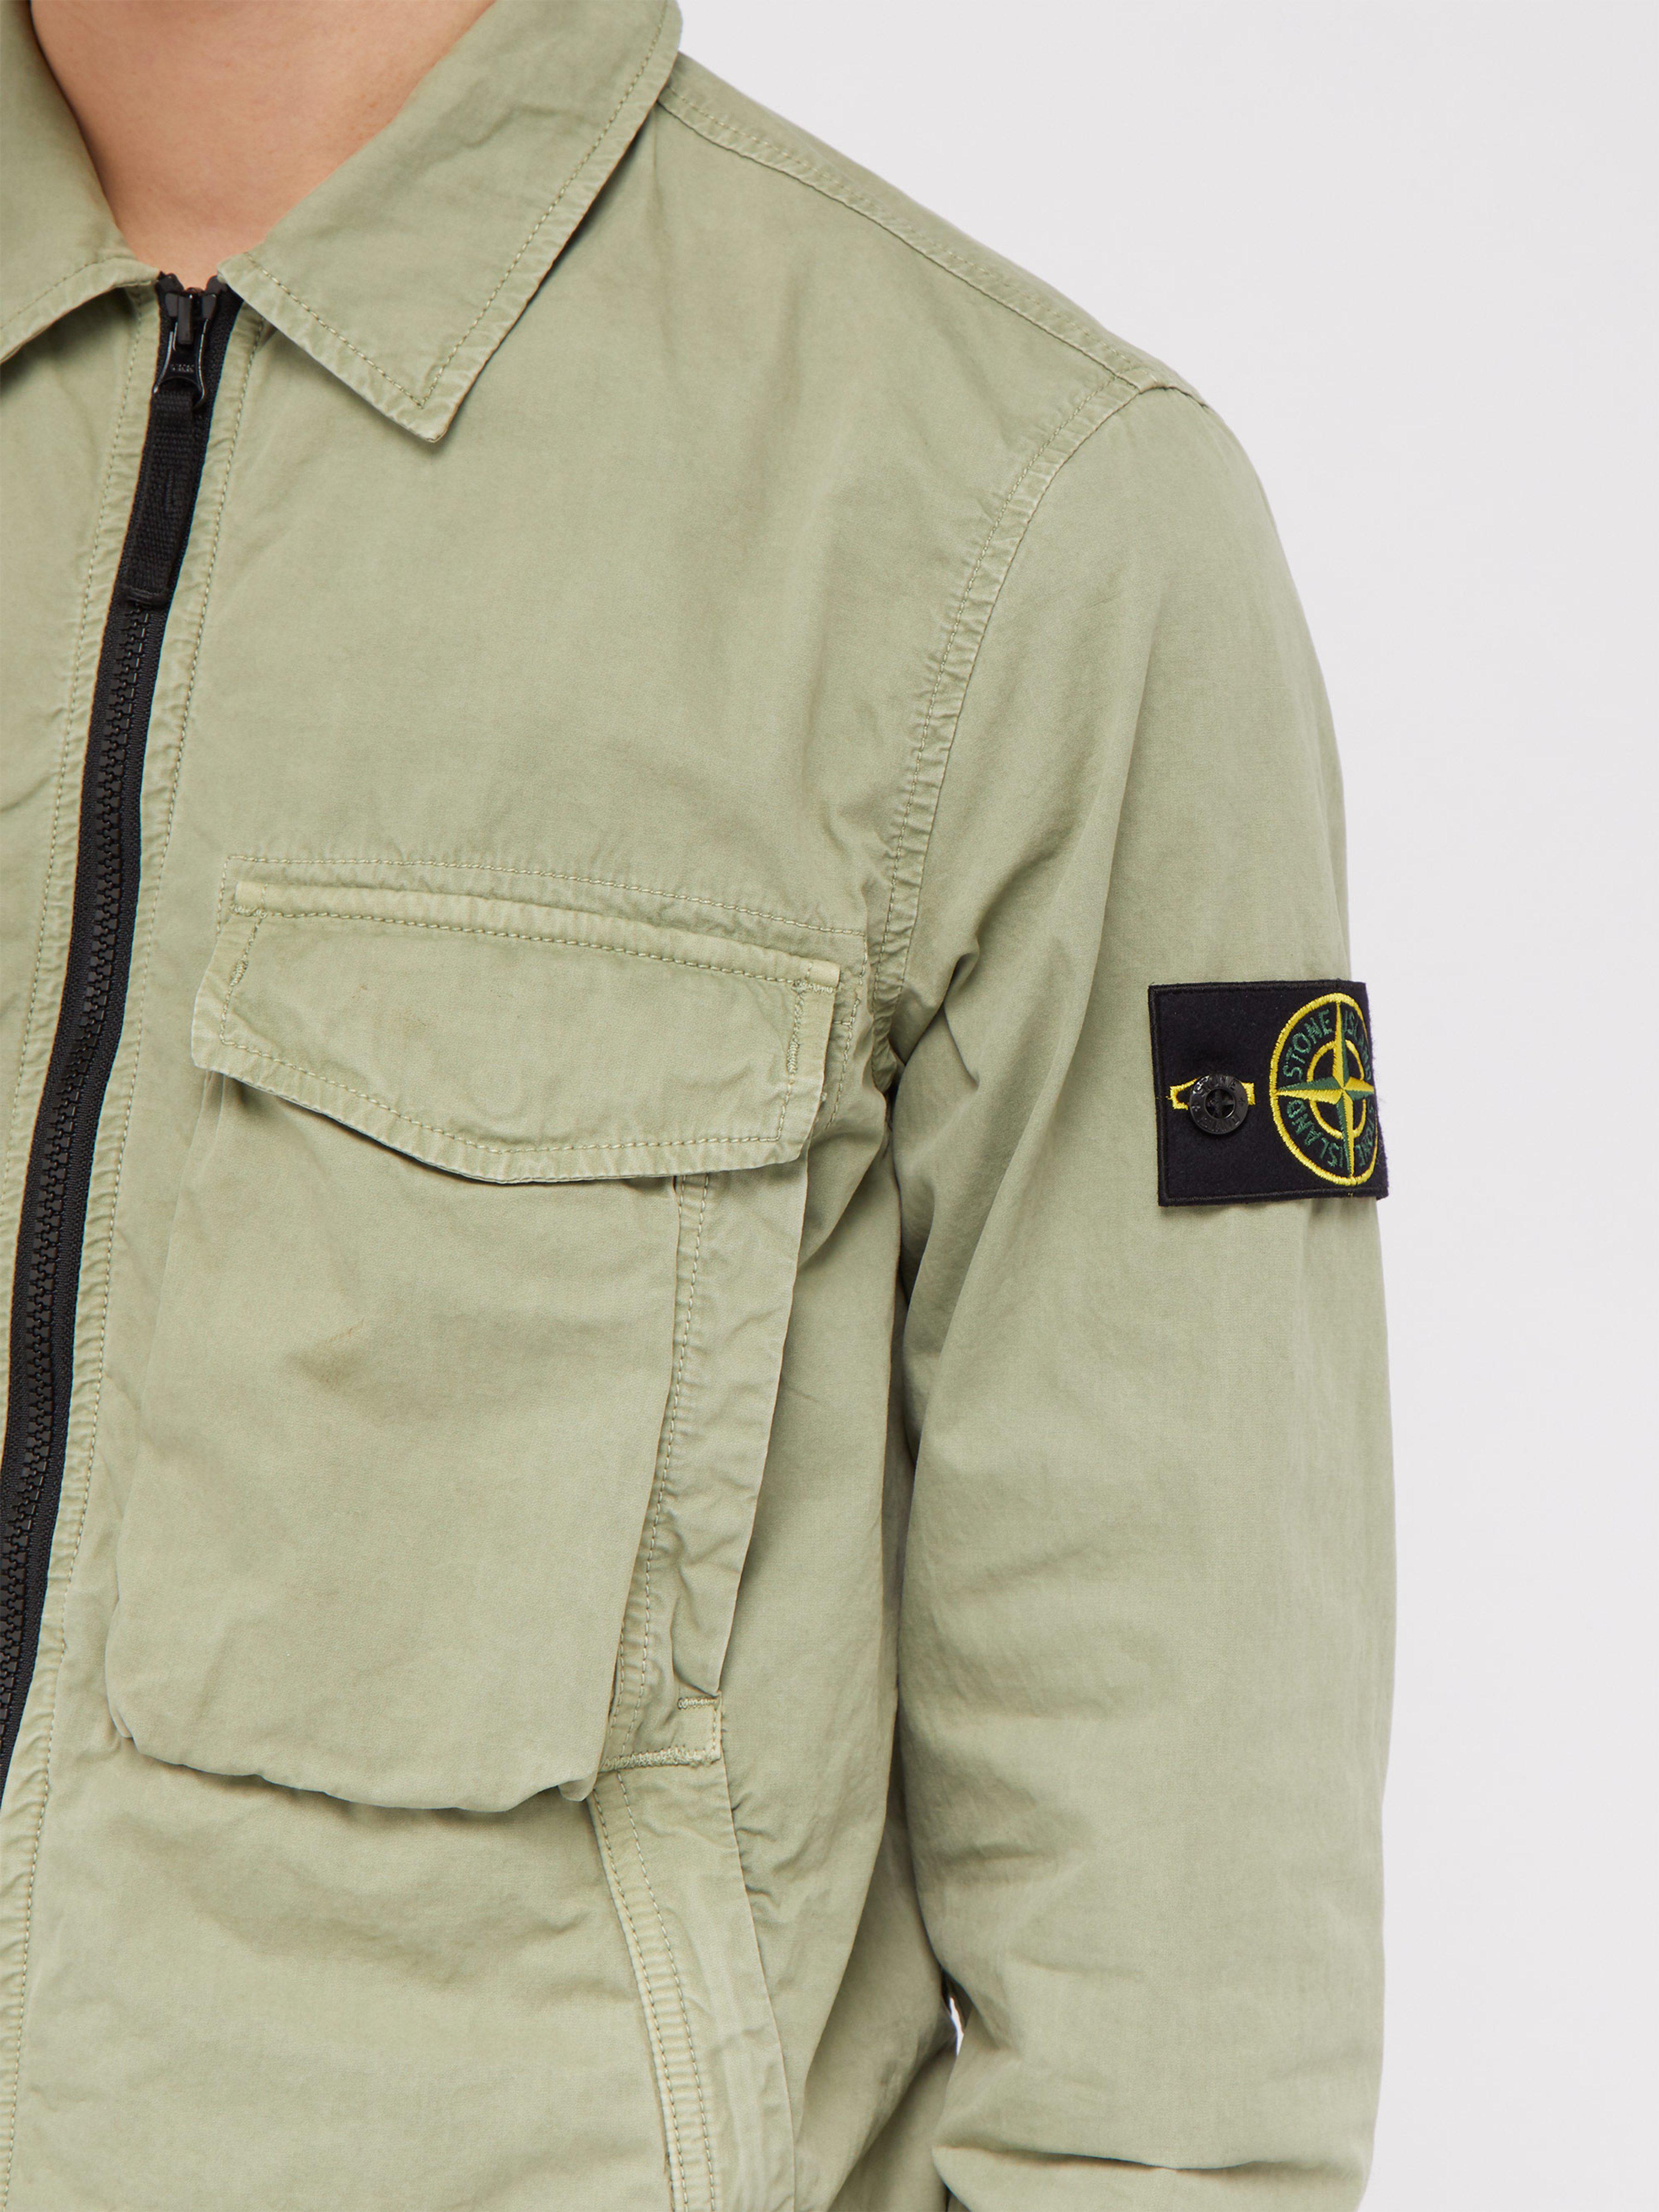 Stone Island Brushed Cotton Canvas Overshirt in Green for Men - Lyst